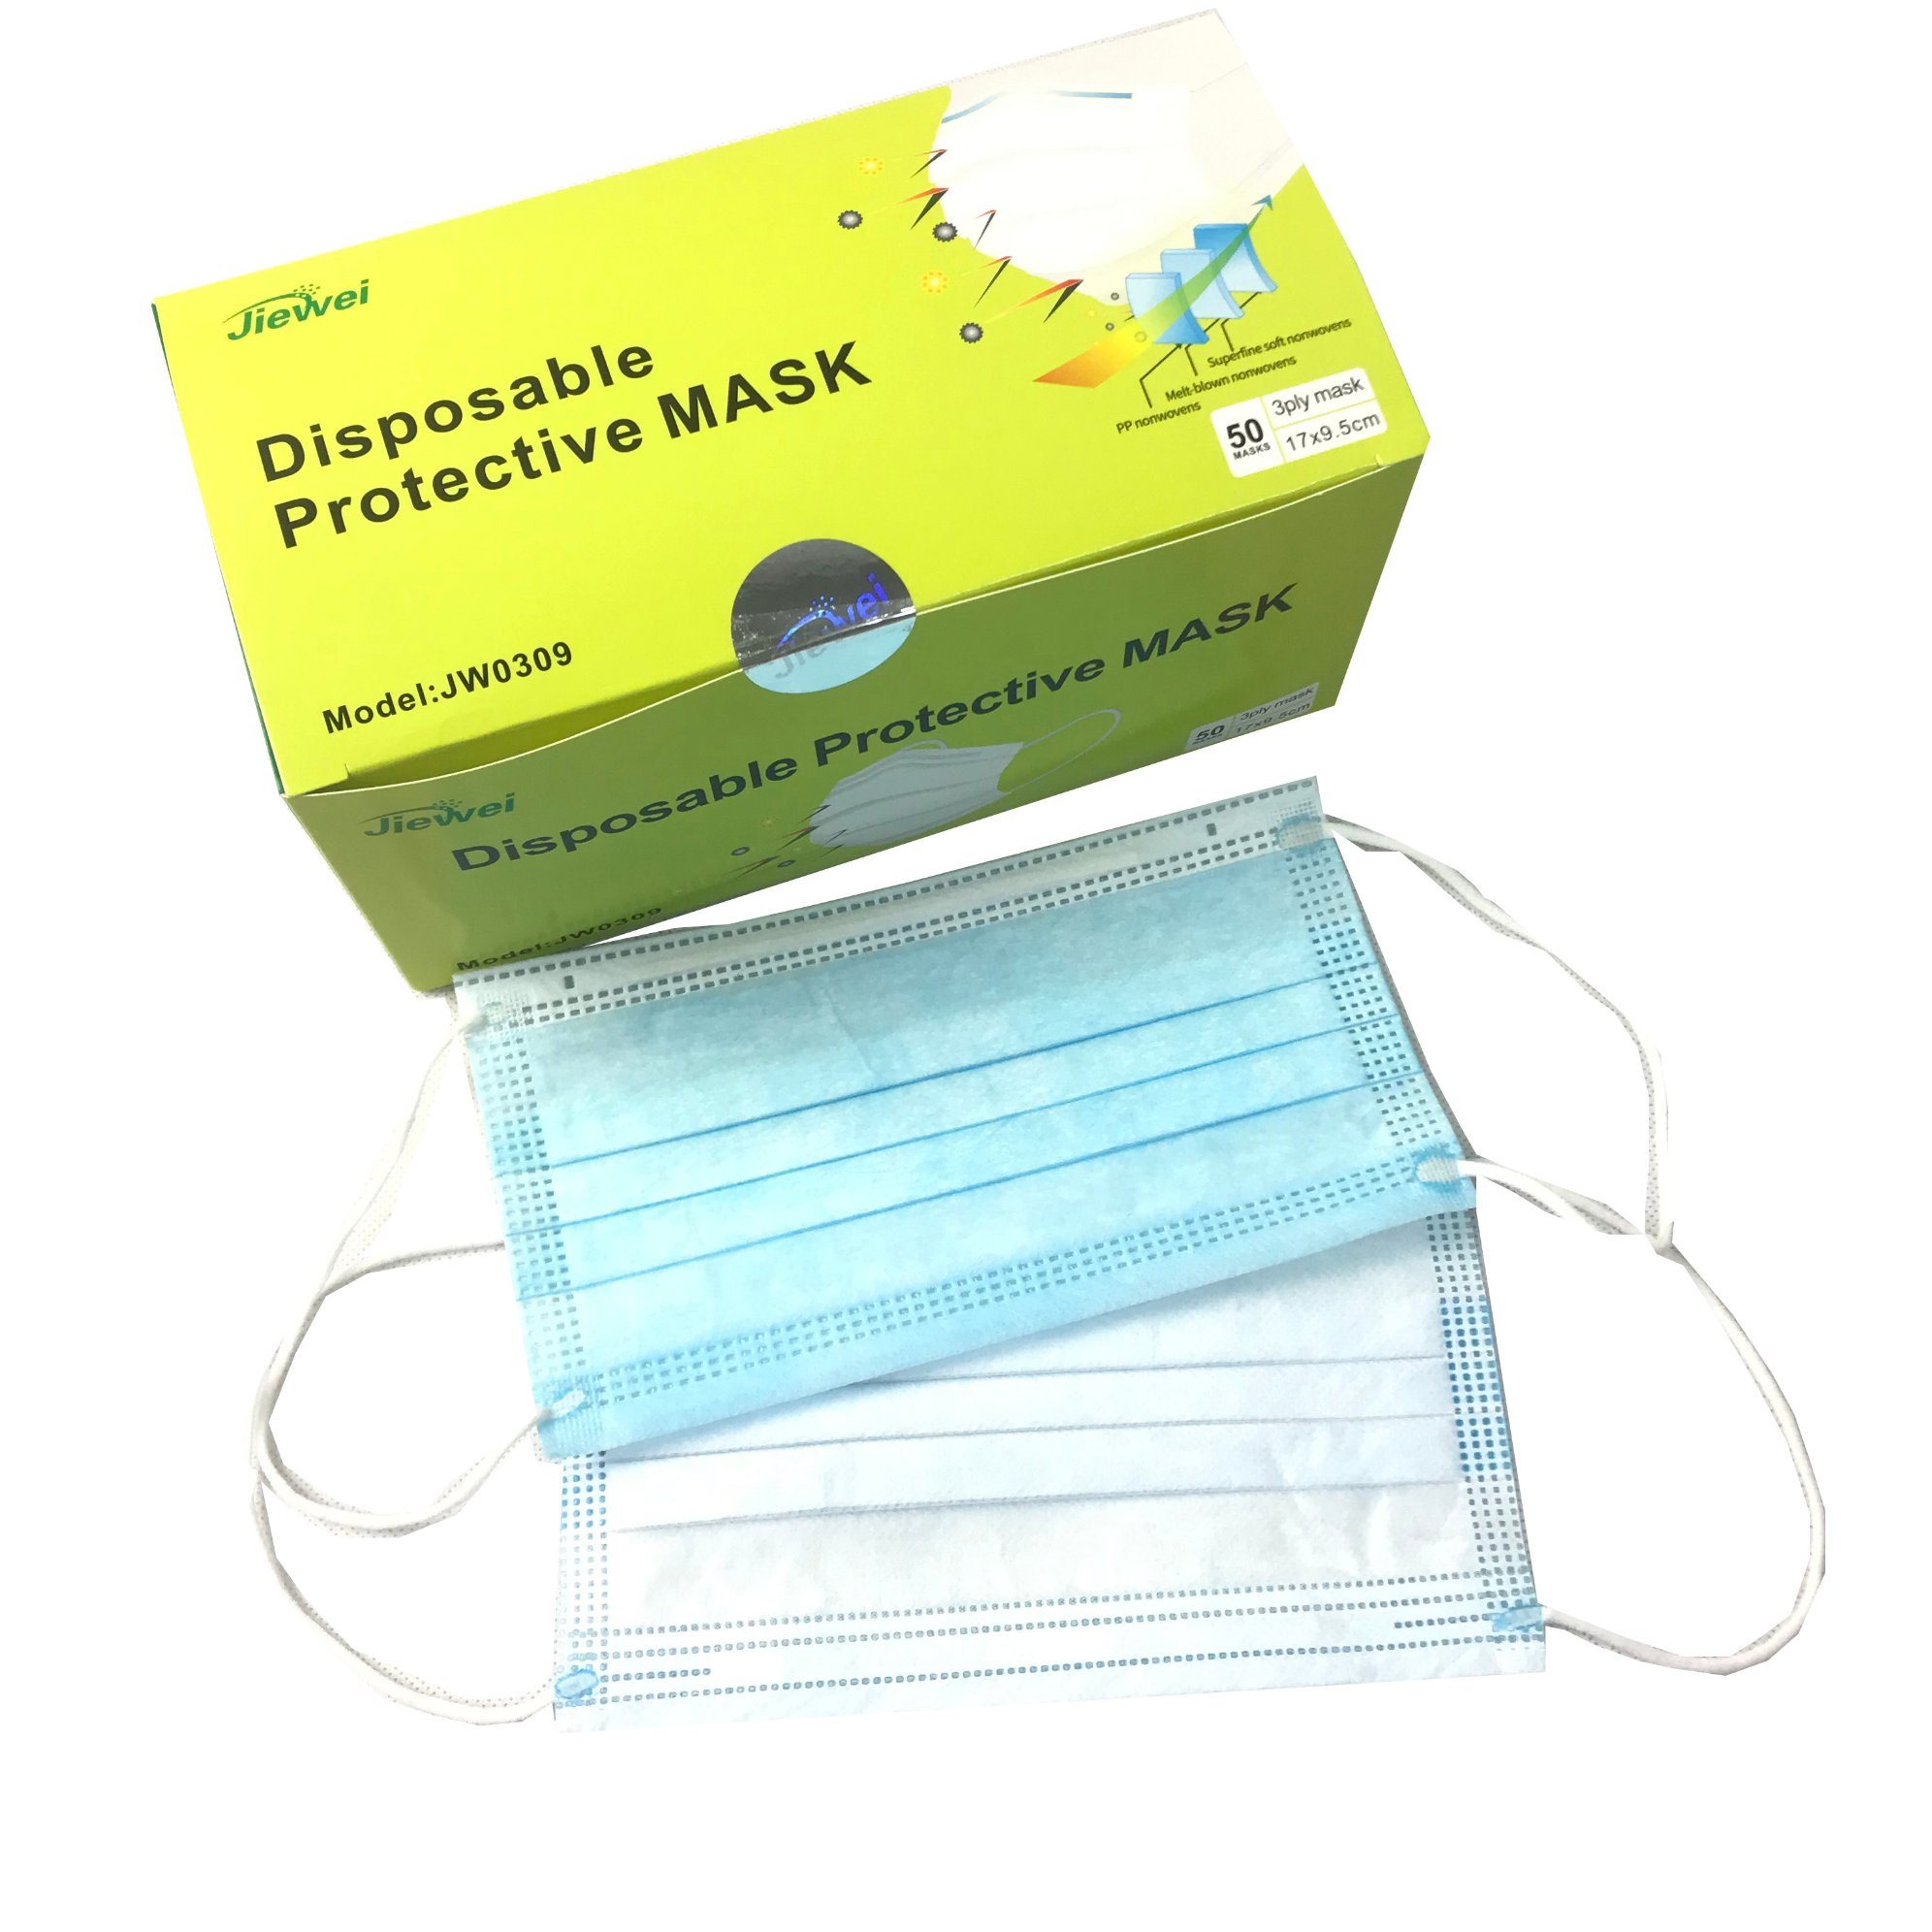 Factory Supply Non-Medical Mask 3 Ply Mask 19.5cm*17.5cn*25GSM Blue Mask